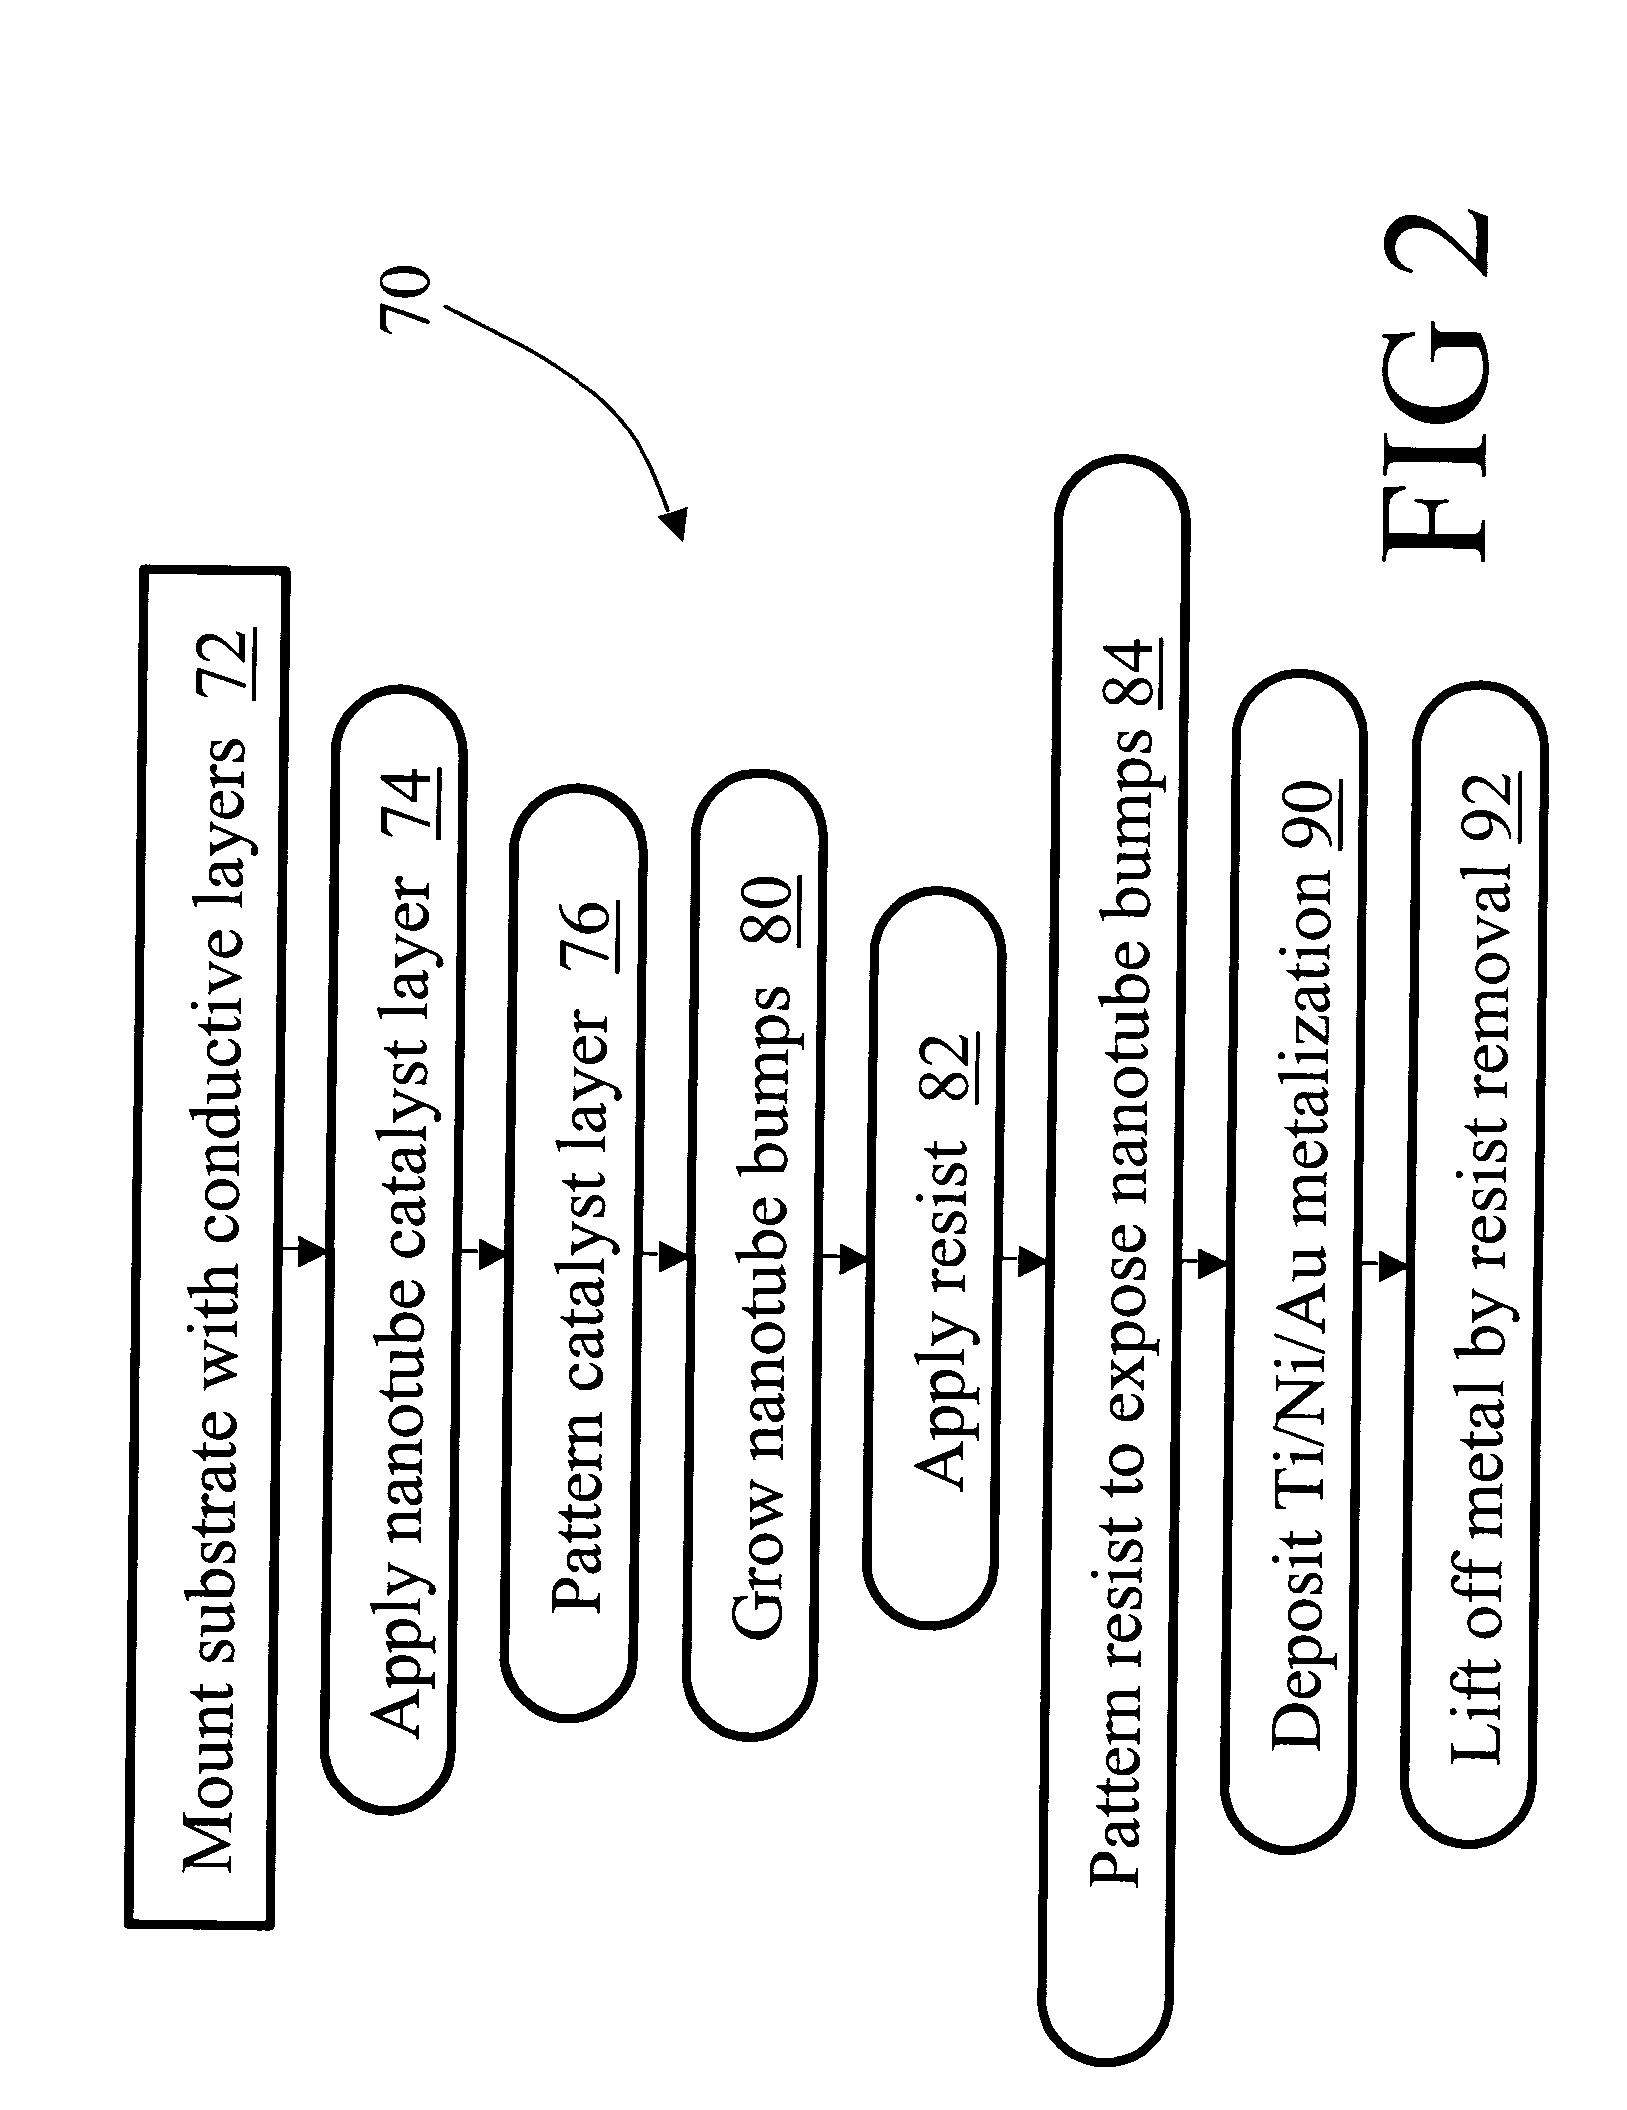 Electronic devices and methods for making same using nanotube regions to assist in thermal heat-sinking